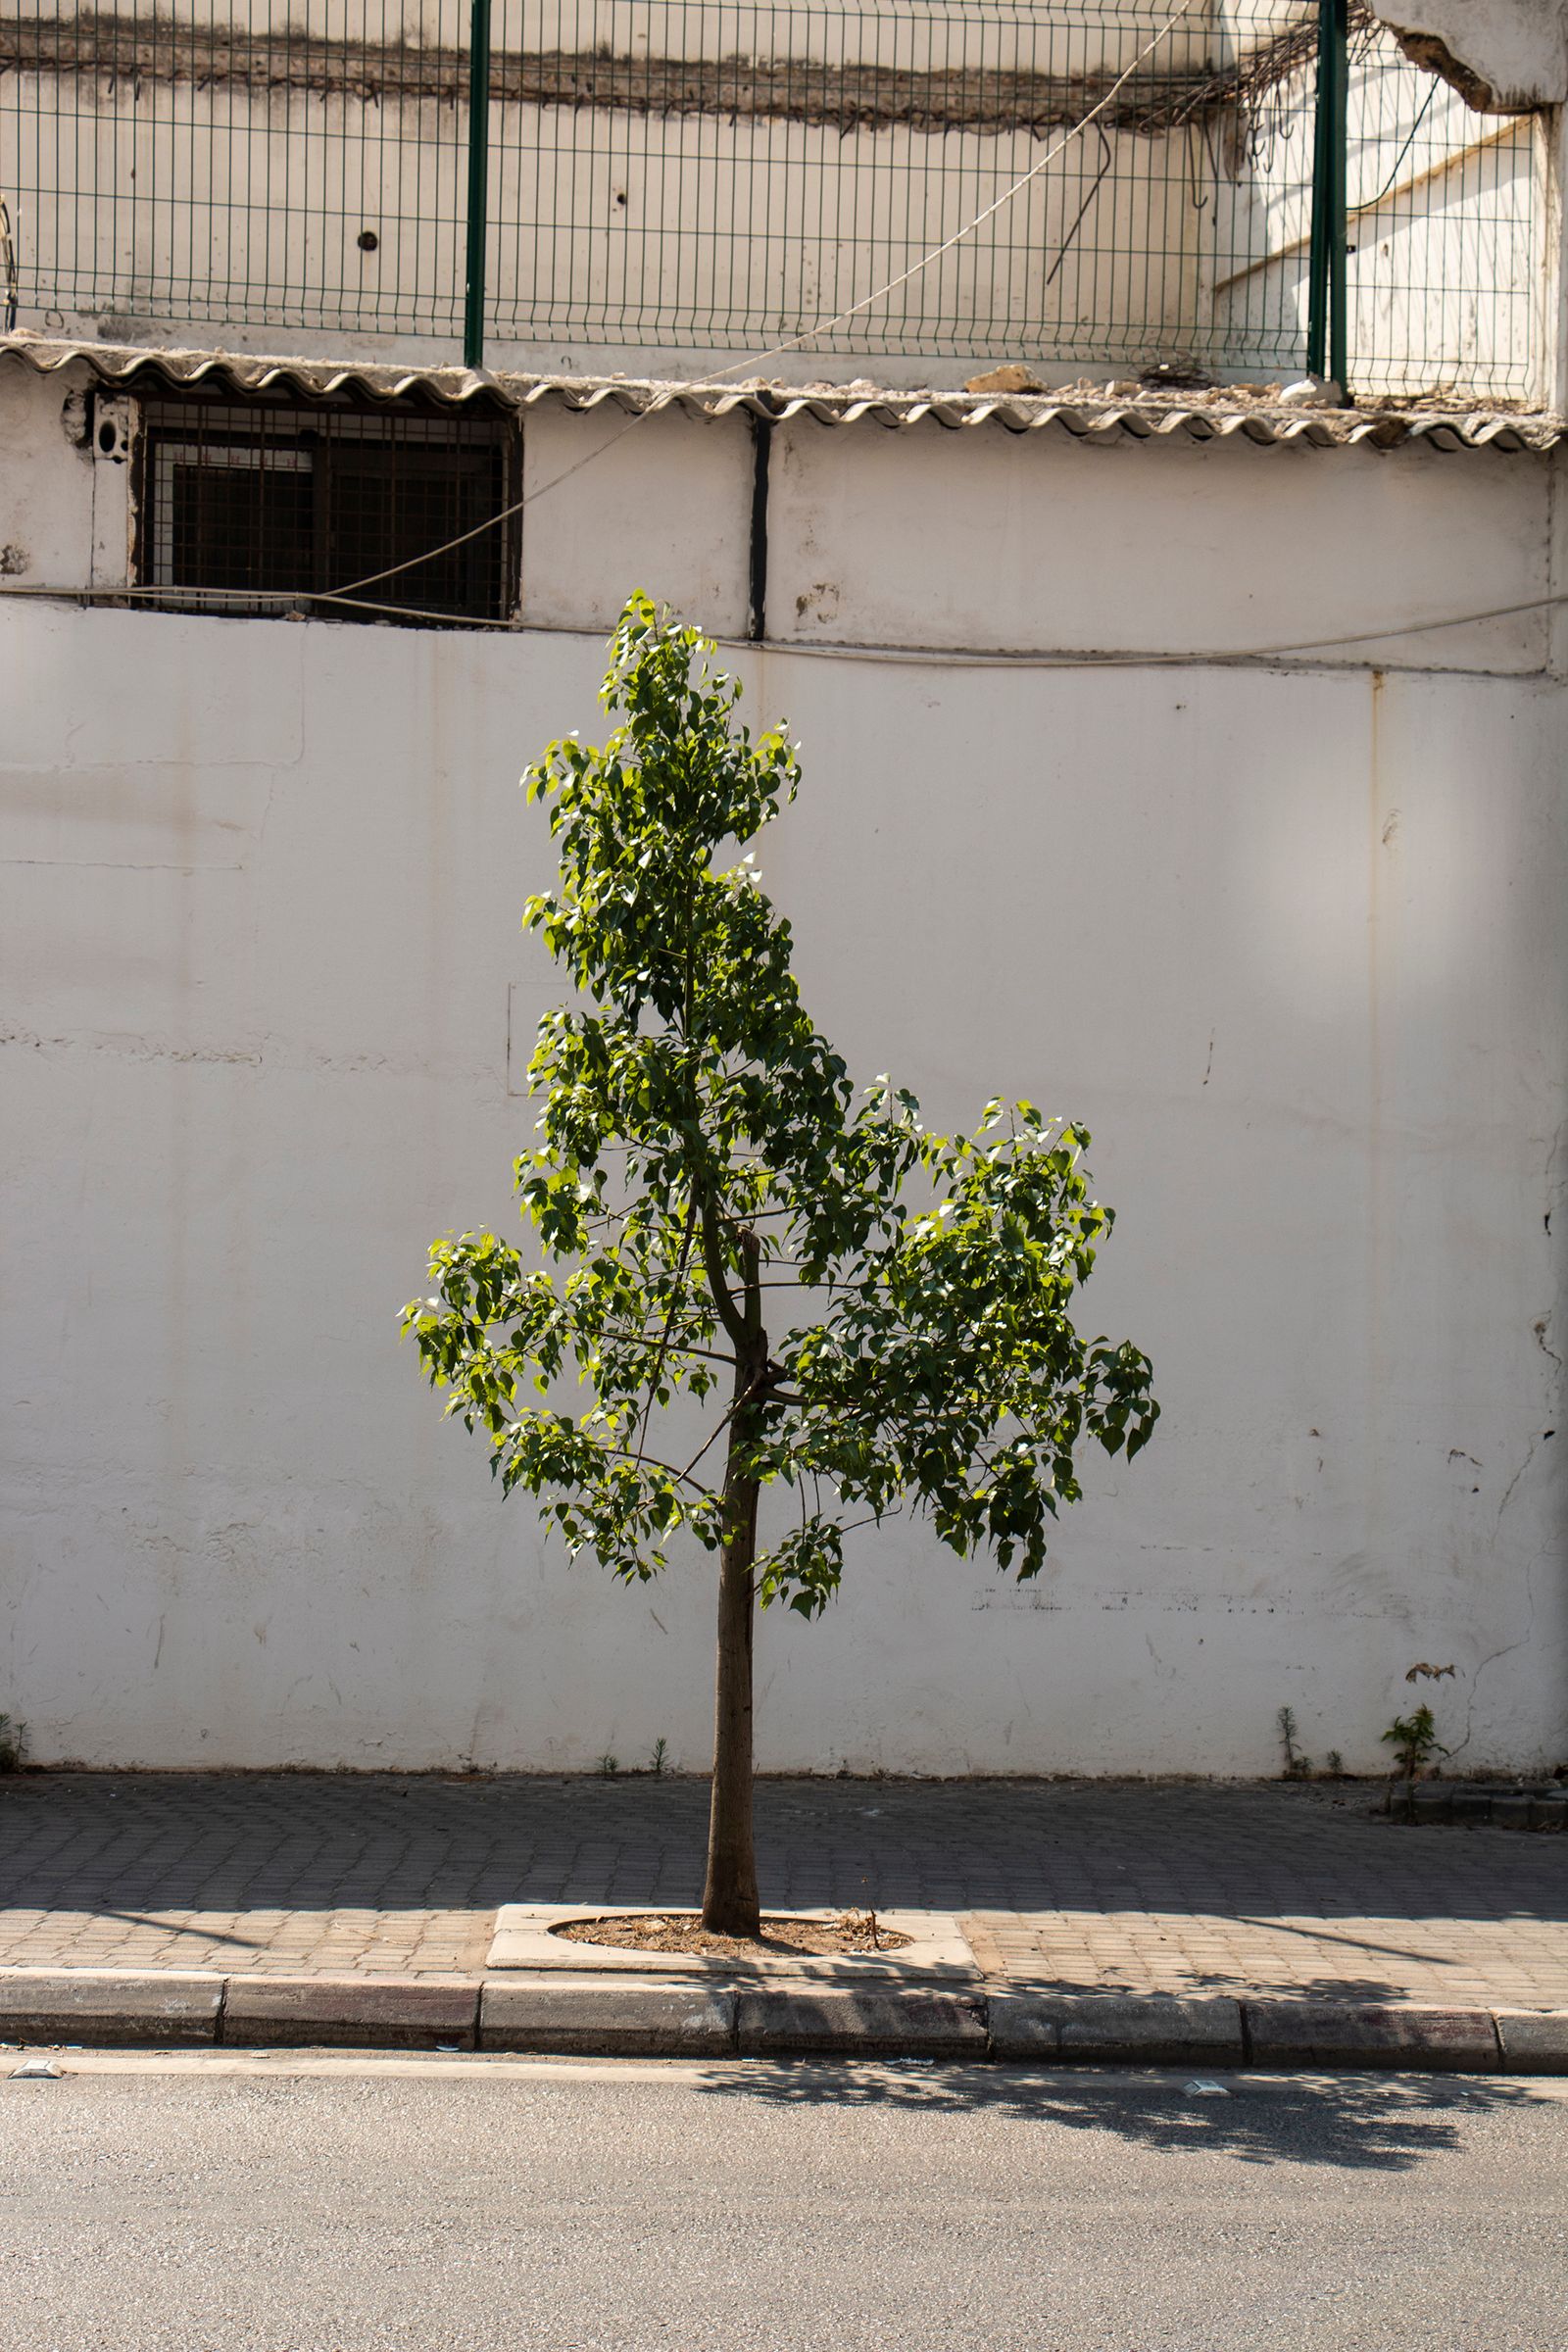 © Malak Wazne - Single Standing Tree | A single tree stands alone in the streets of Beirut, Lebanon.